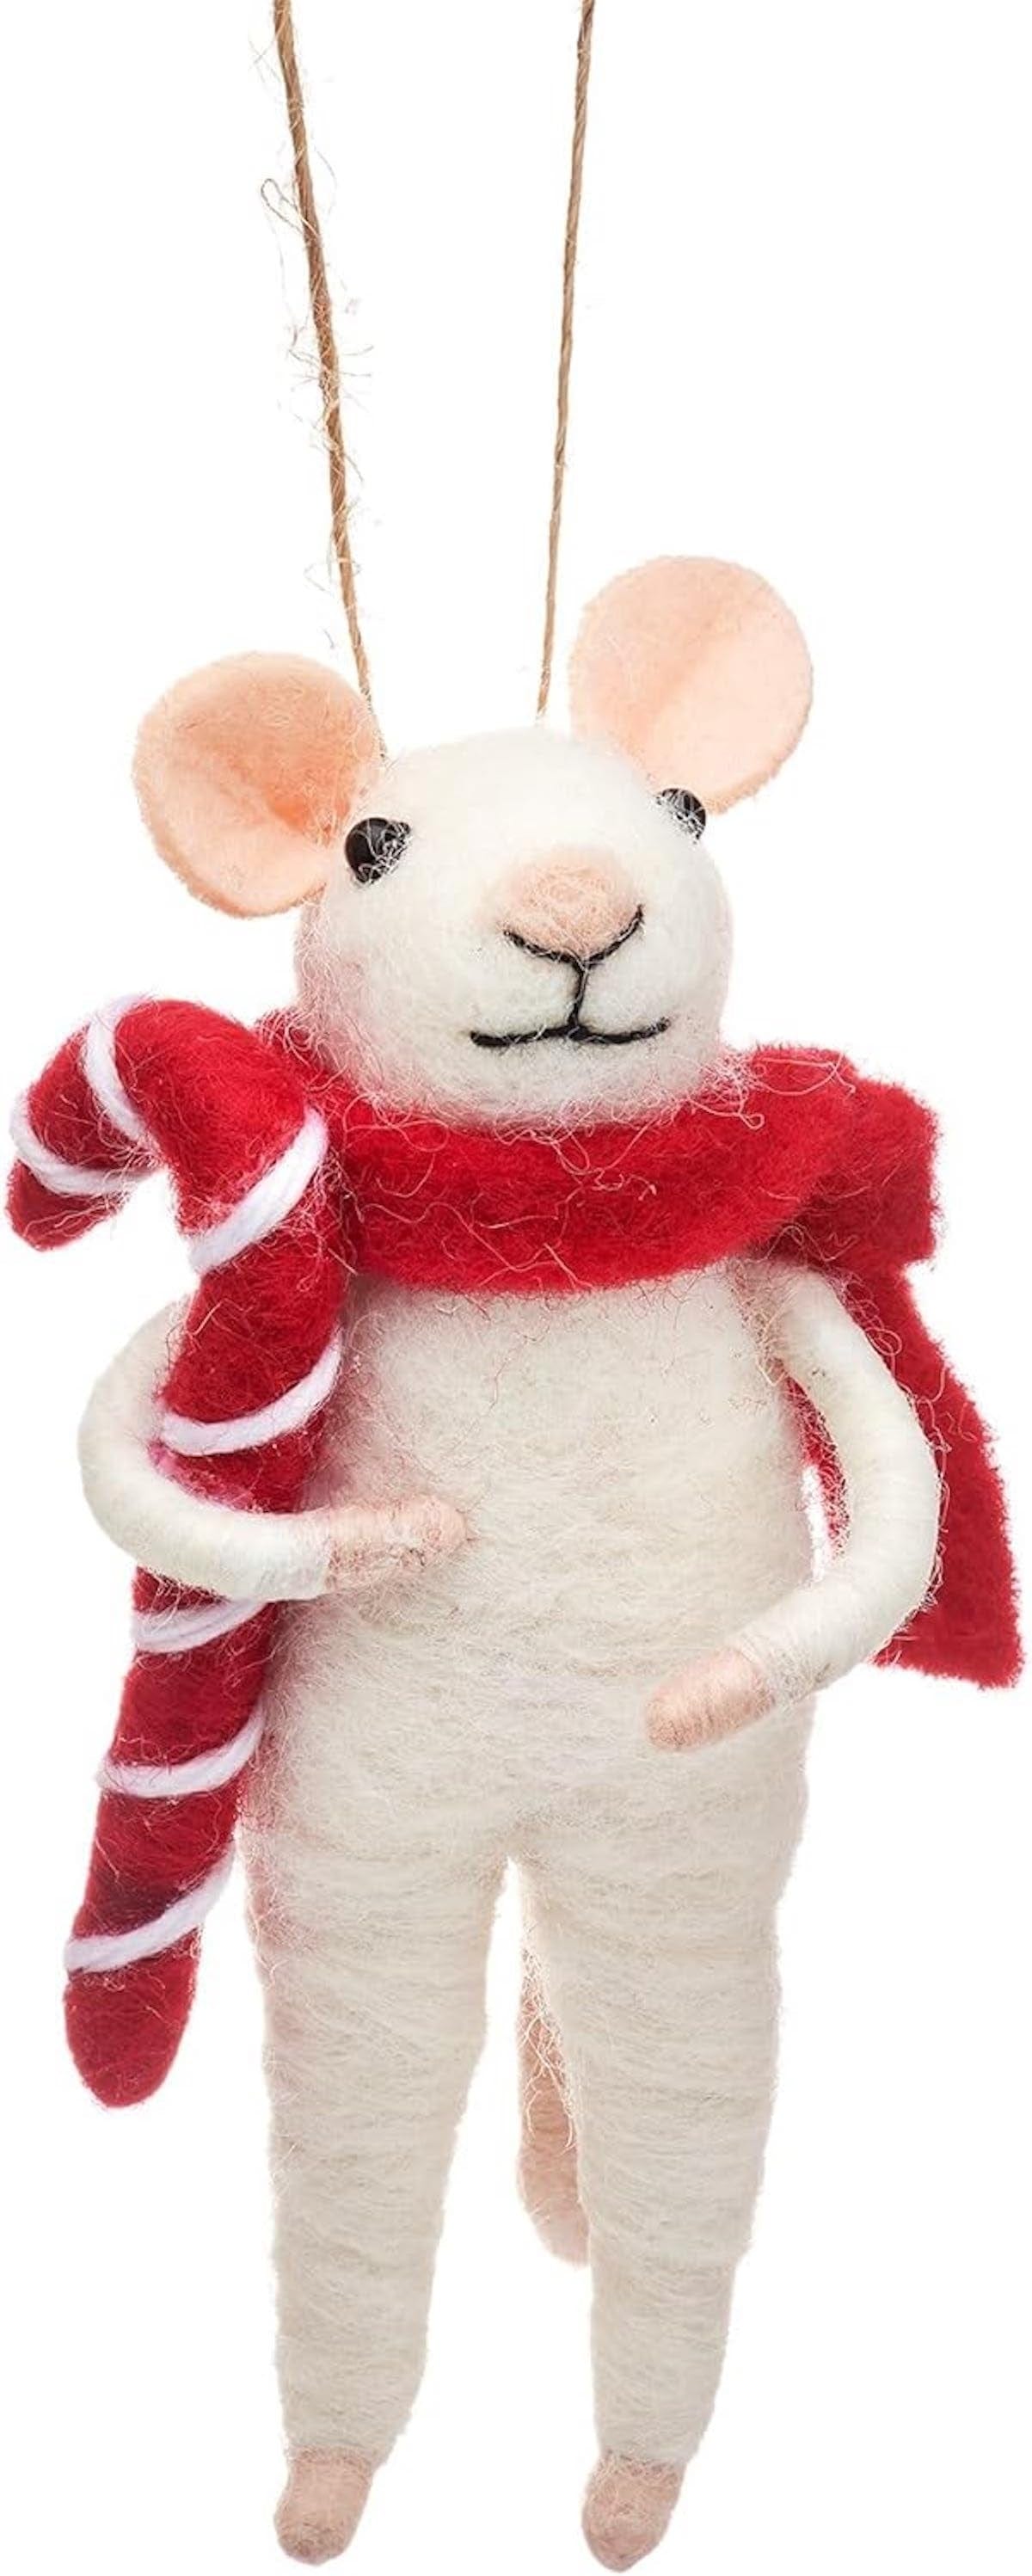 Sass & Belle Christmas Christmas Decorations Felt Mouse with Candy Cane Christmas Tree Decoration